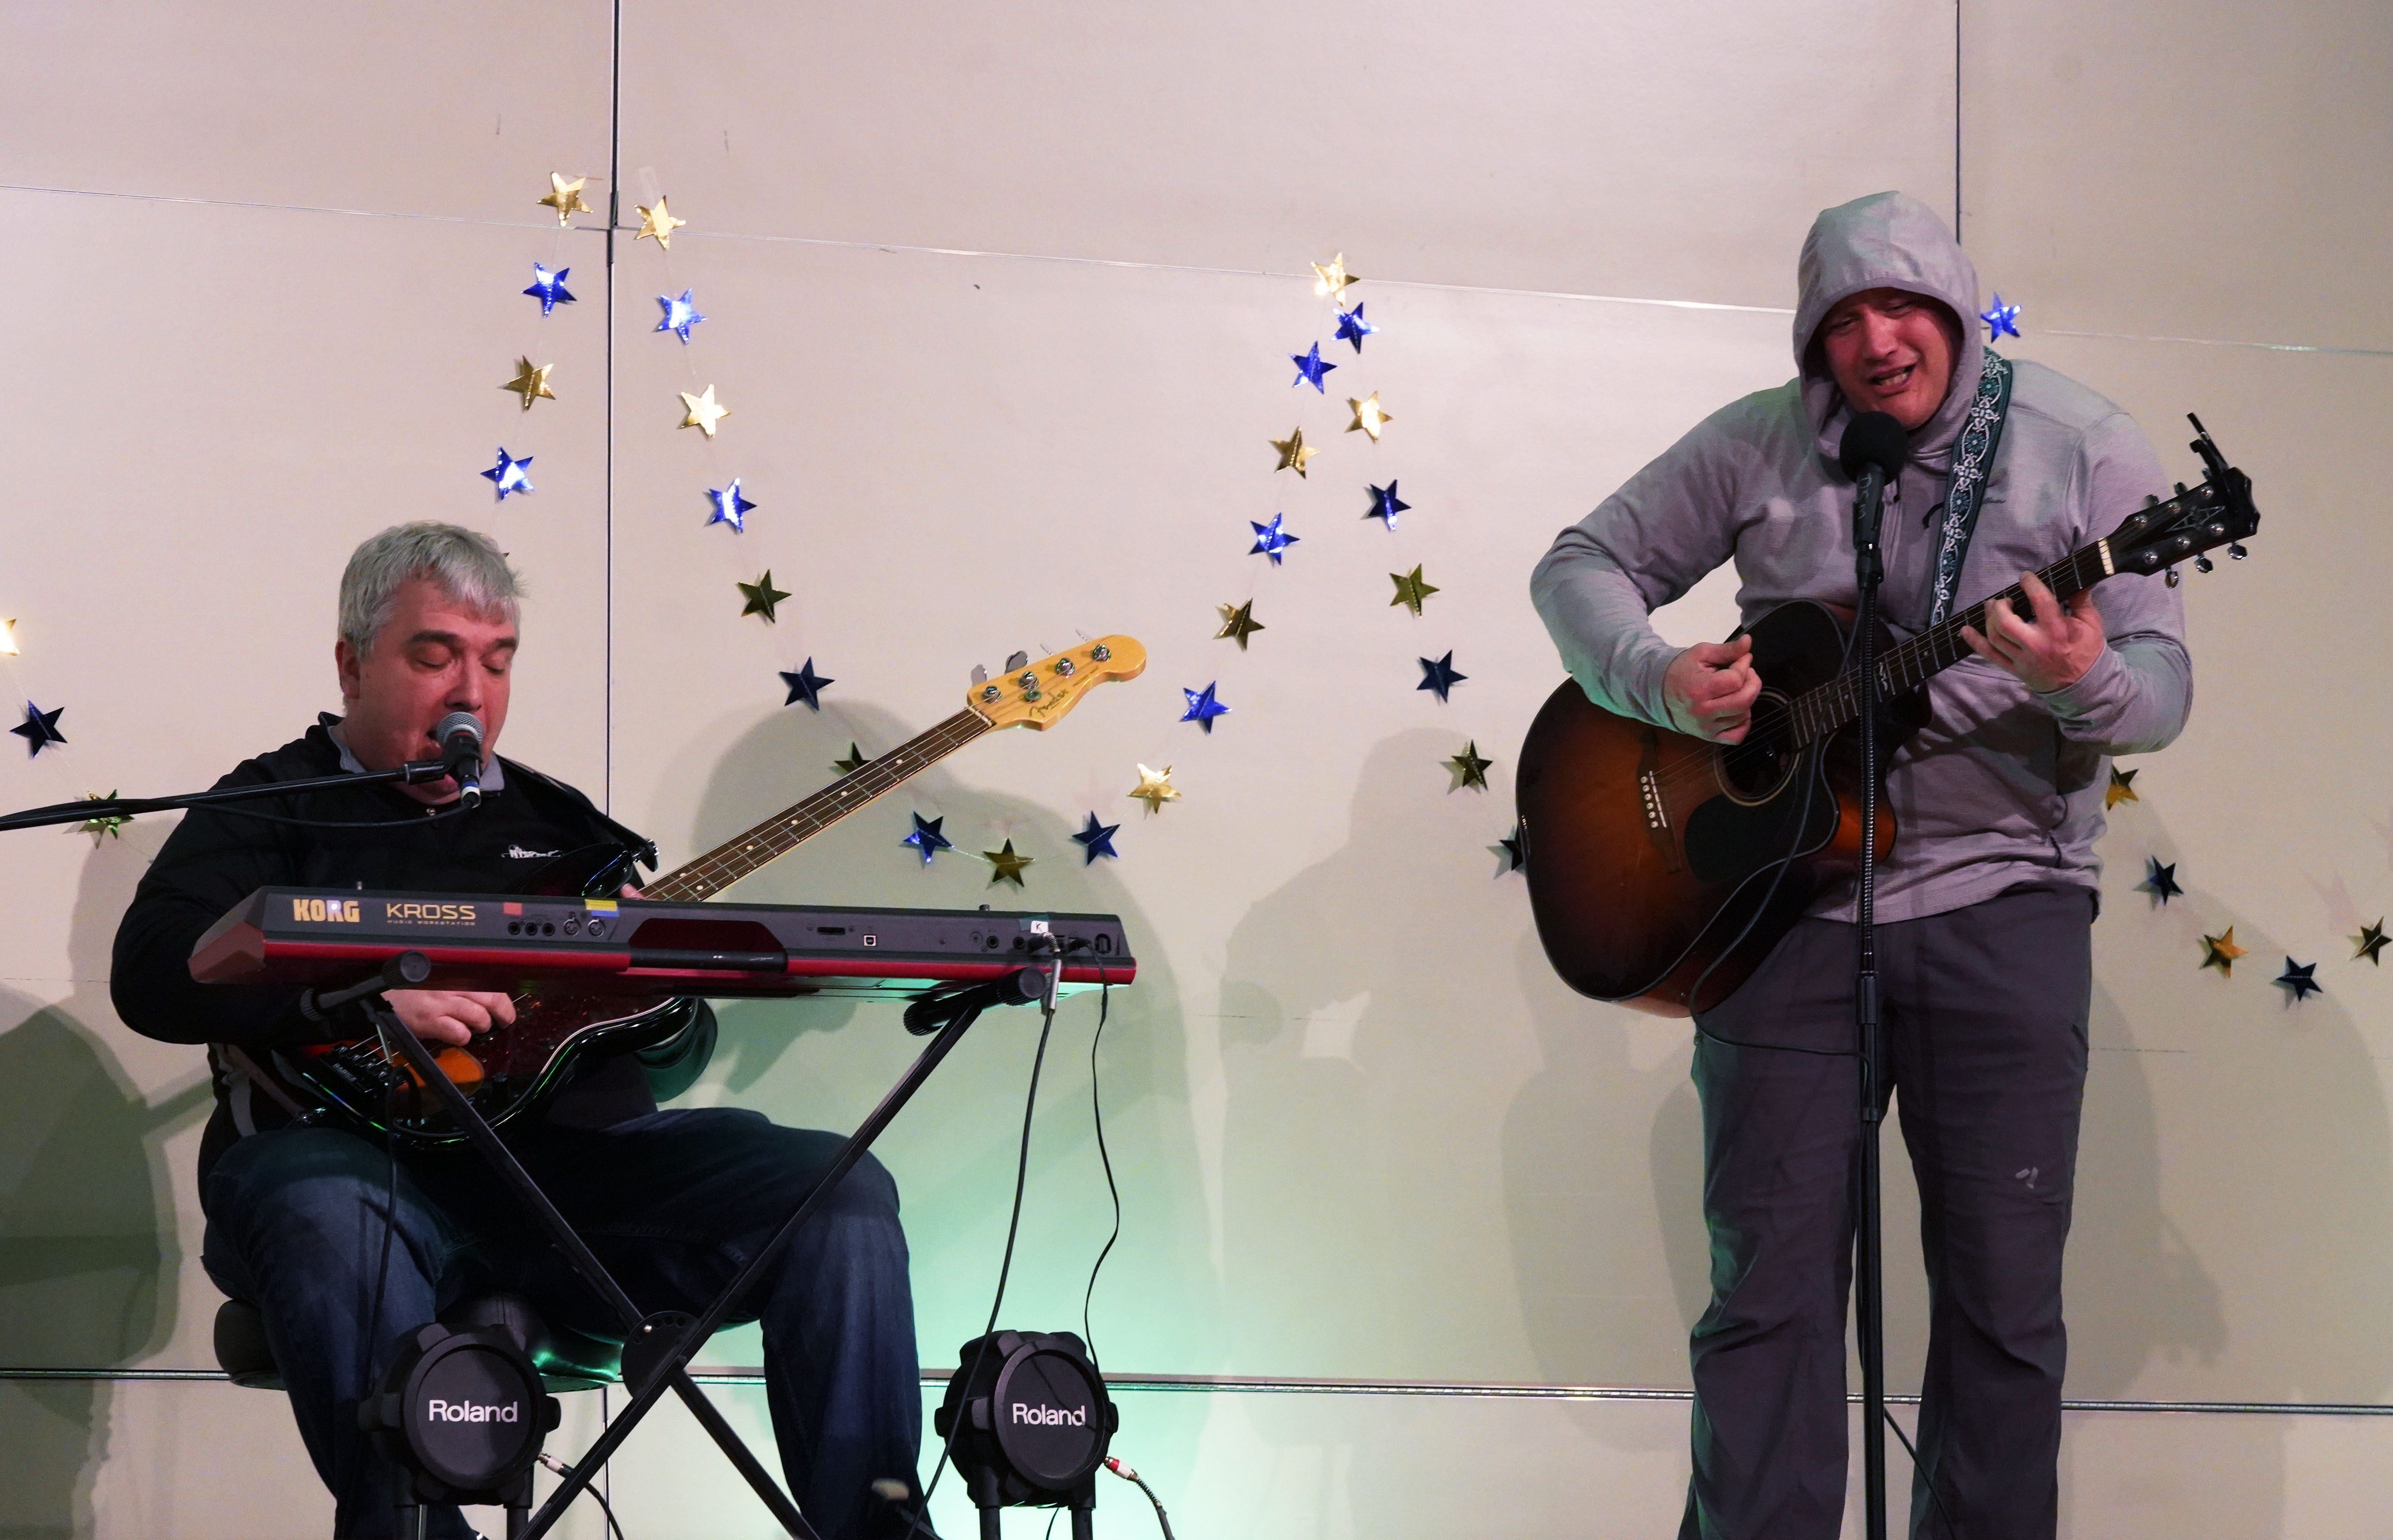 Two teachers sing and play instruments on stage during talent show.